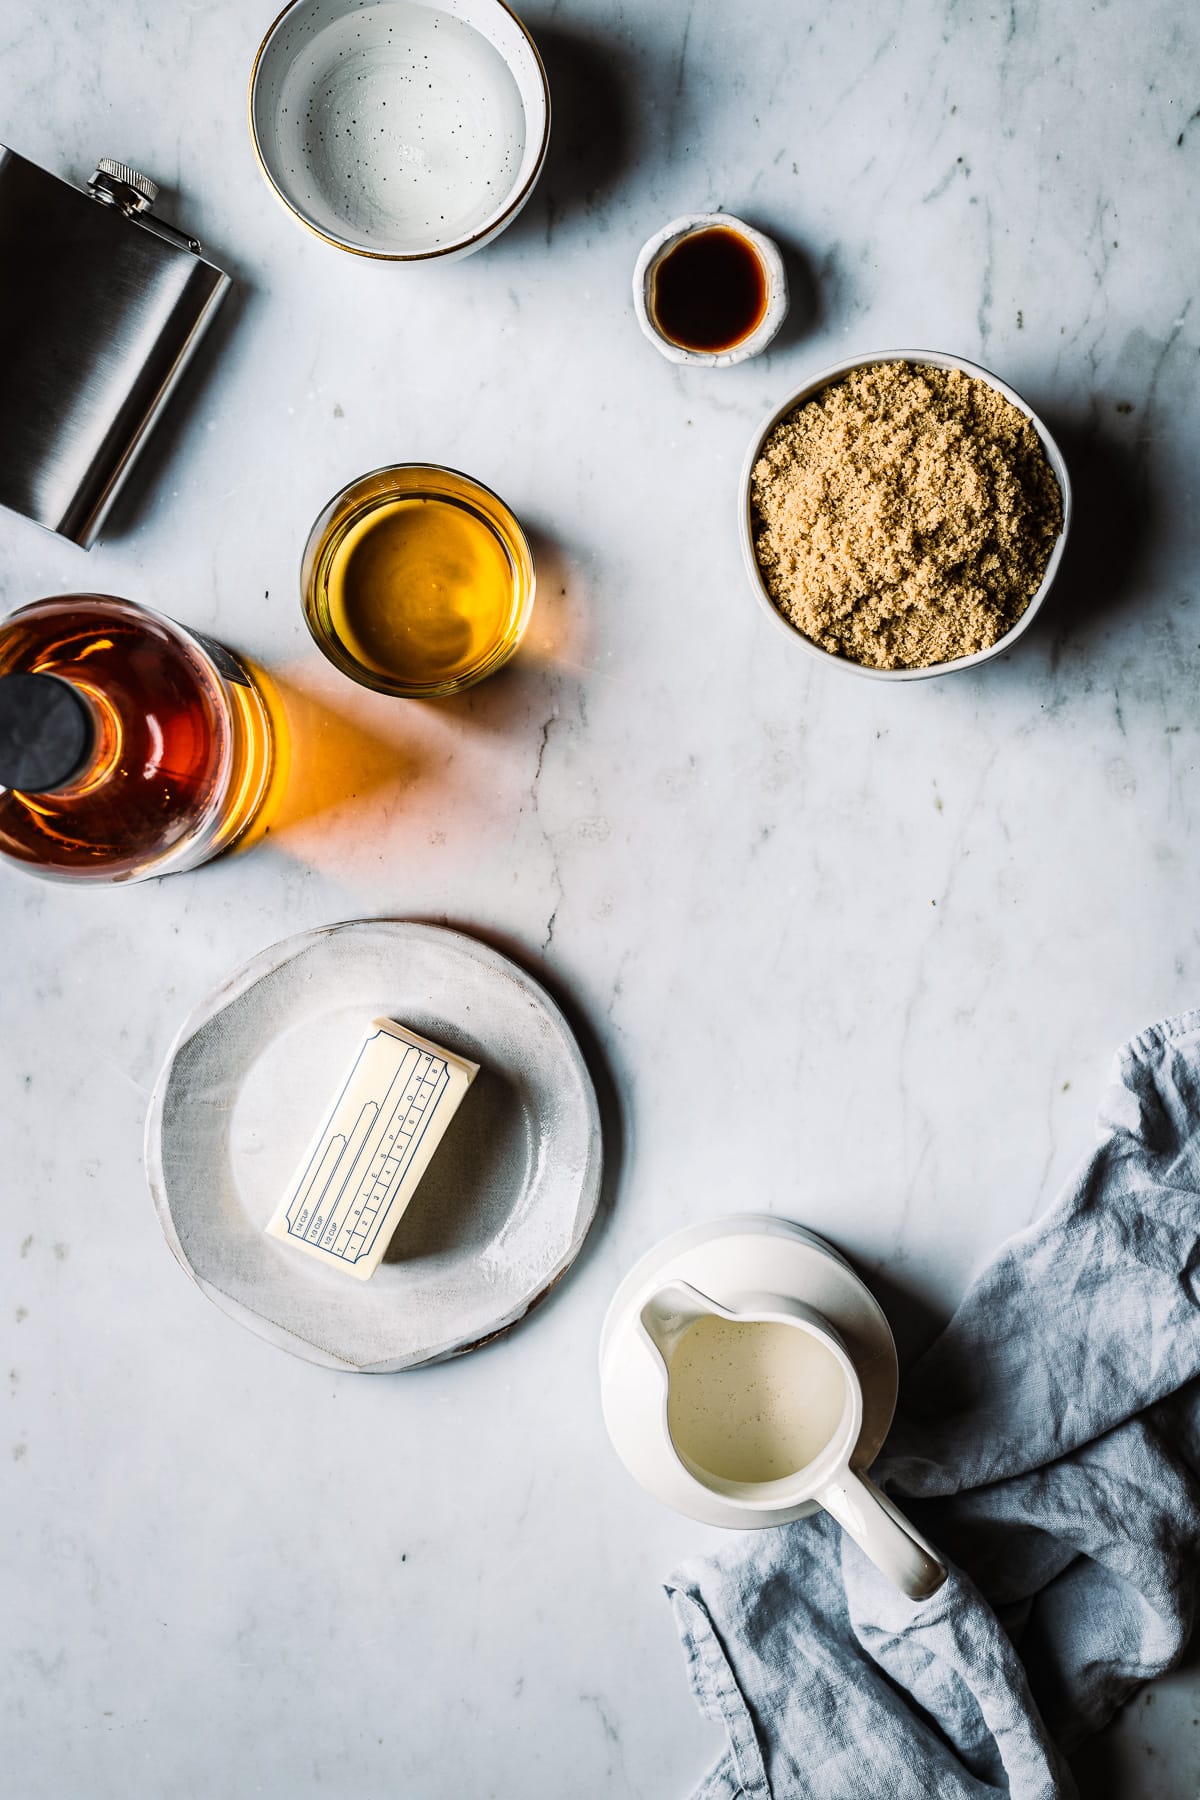 Ingredients for making caramels in containers on a grey marble surface. Light shines through a bottle of whiskey poured into a glass. Bowls of sugars and vanilla rest nearby along with a plate of butter and a pitcher of cream.